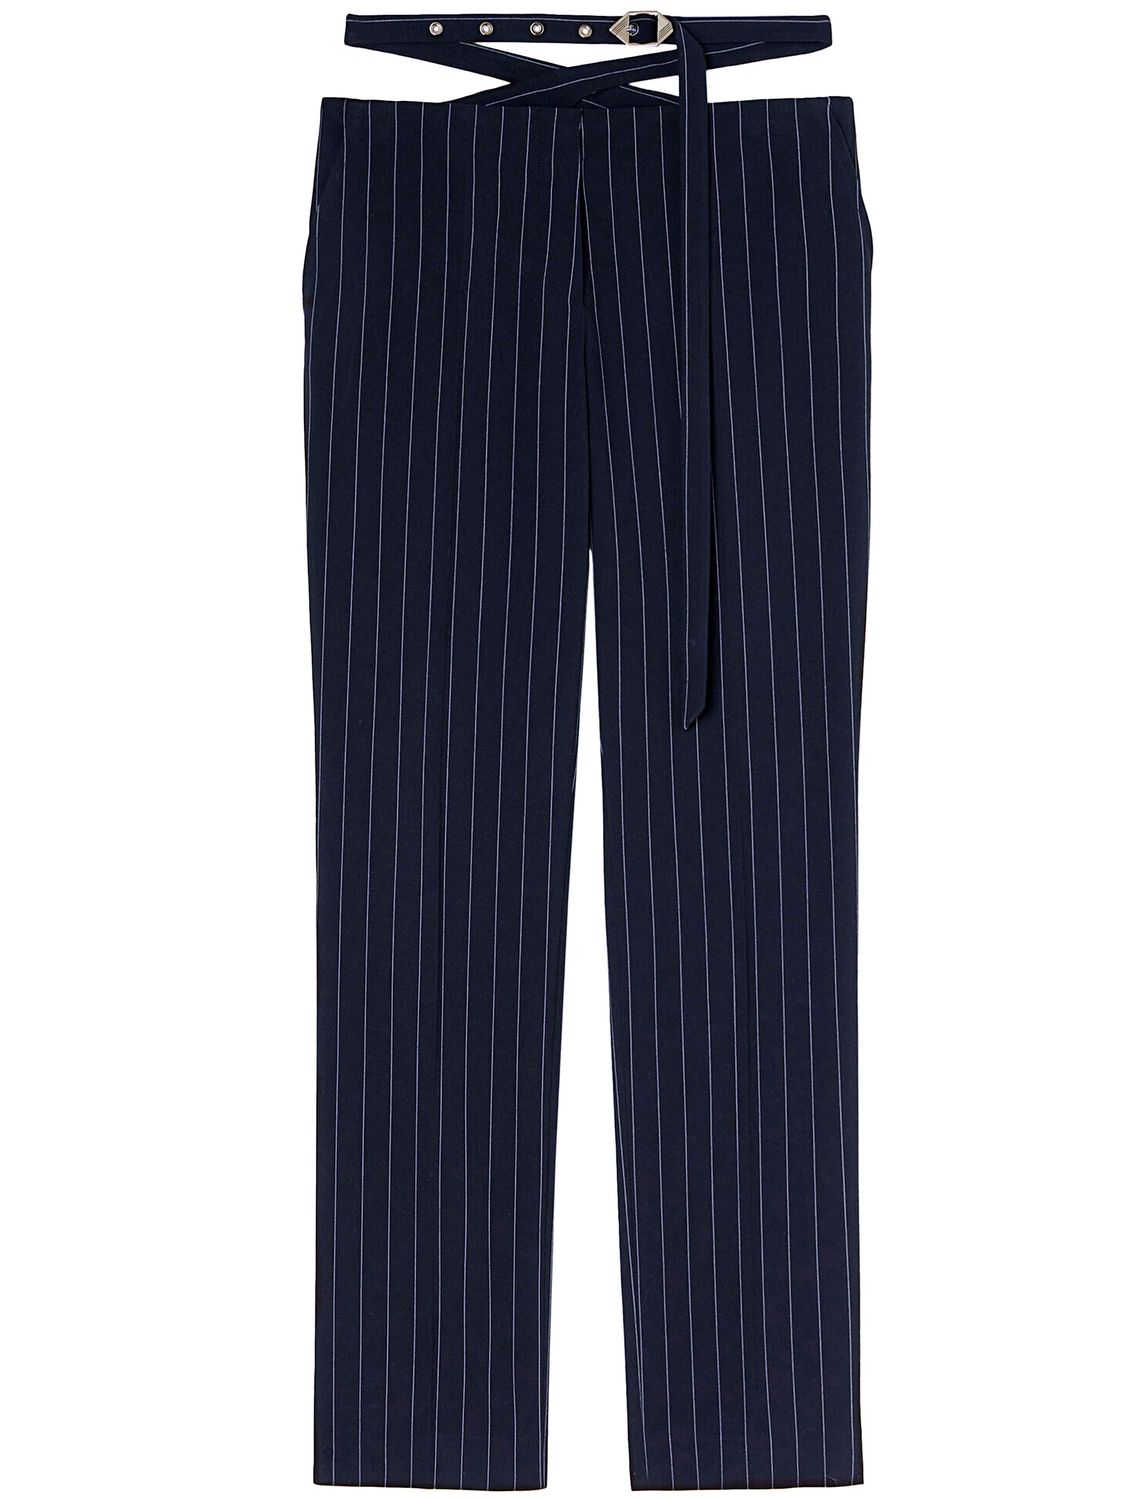 Navy Blue Striped Crossover Pants with Back Straps